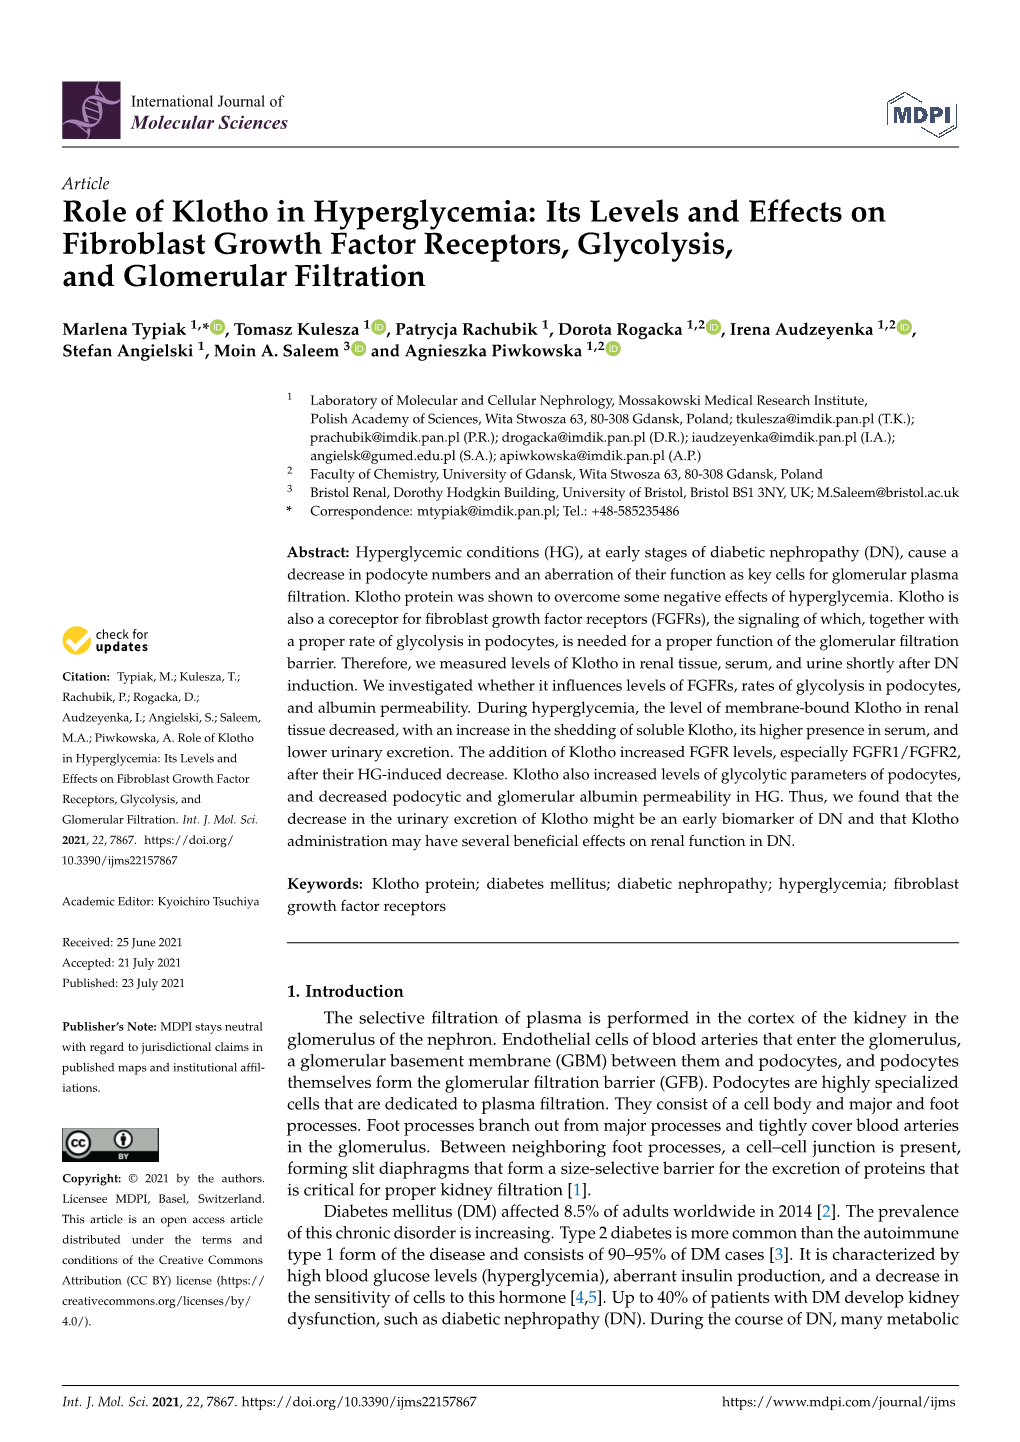 Role of Klotho in Hyperglycemia: Its Levels and Effects on Fibroblast Growth Factor Receptors, Glycolysis, and Glomerular Filtration